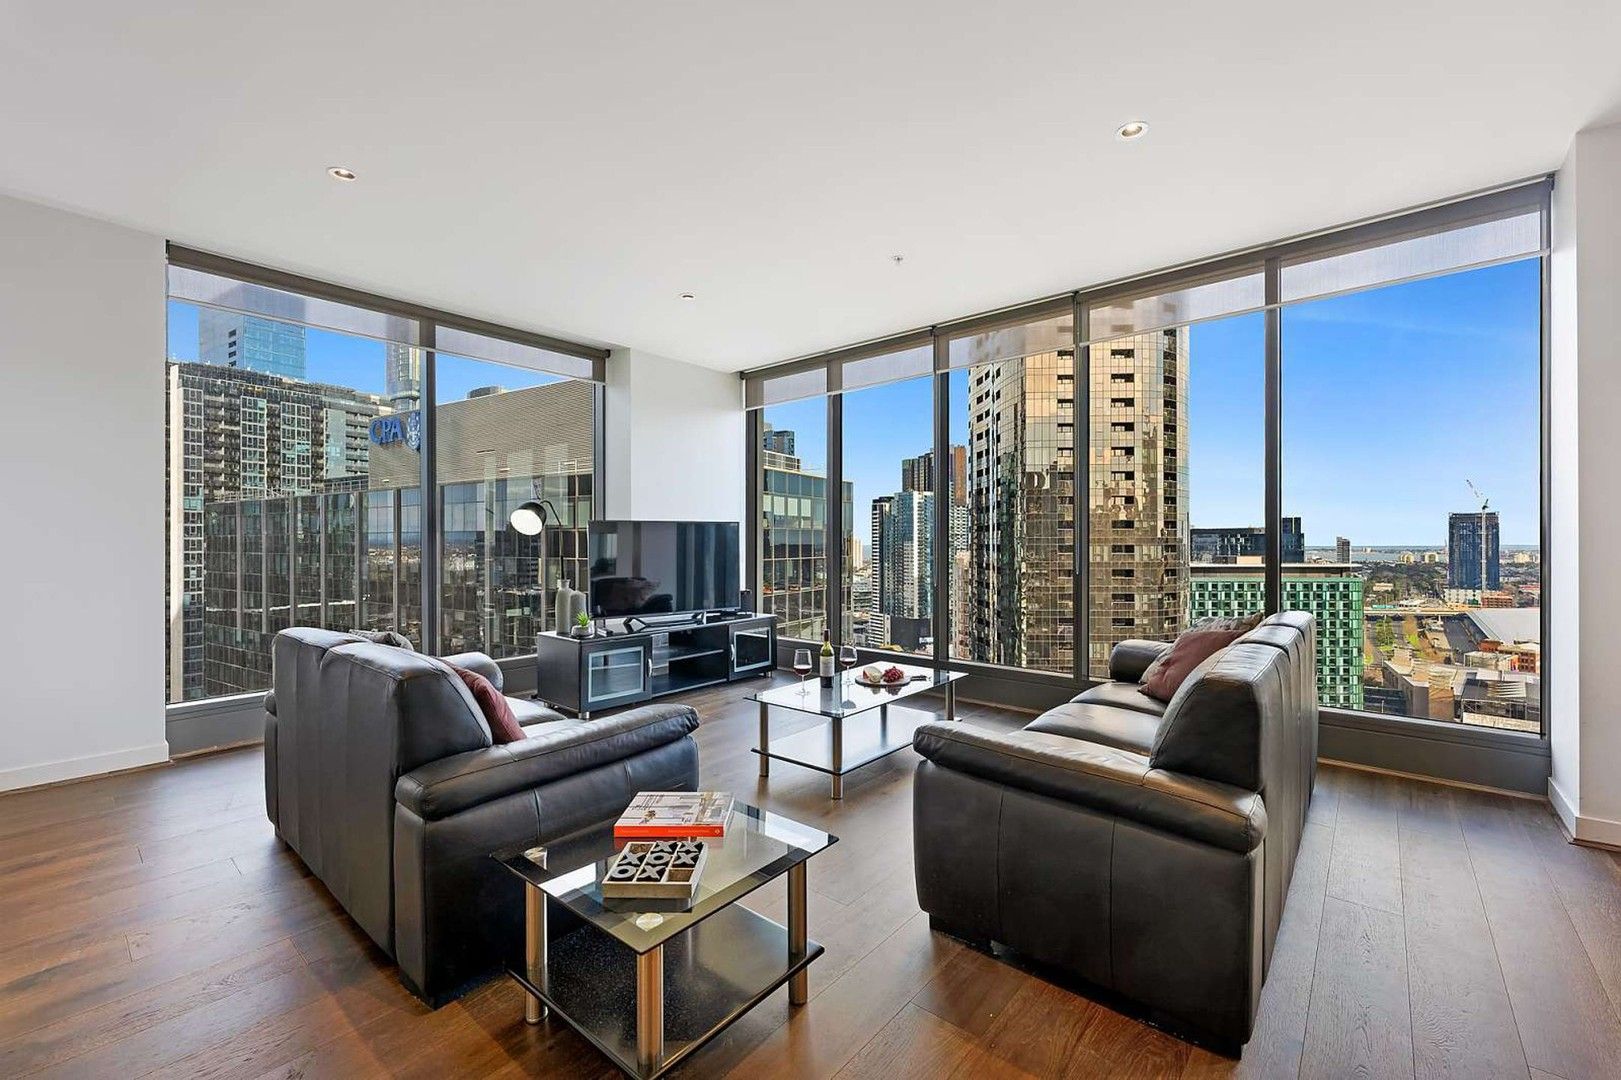 2 bedrooms Apartment / Unit / Flat in 2712/1 Freshwater Place SOUTHBANK VIC, 3006